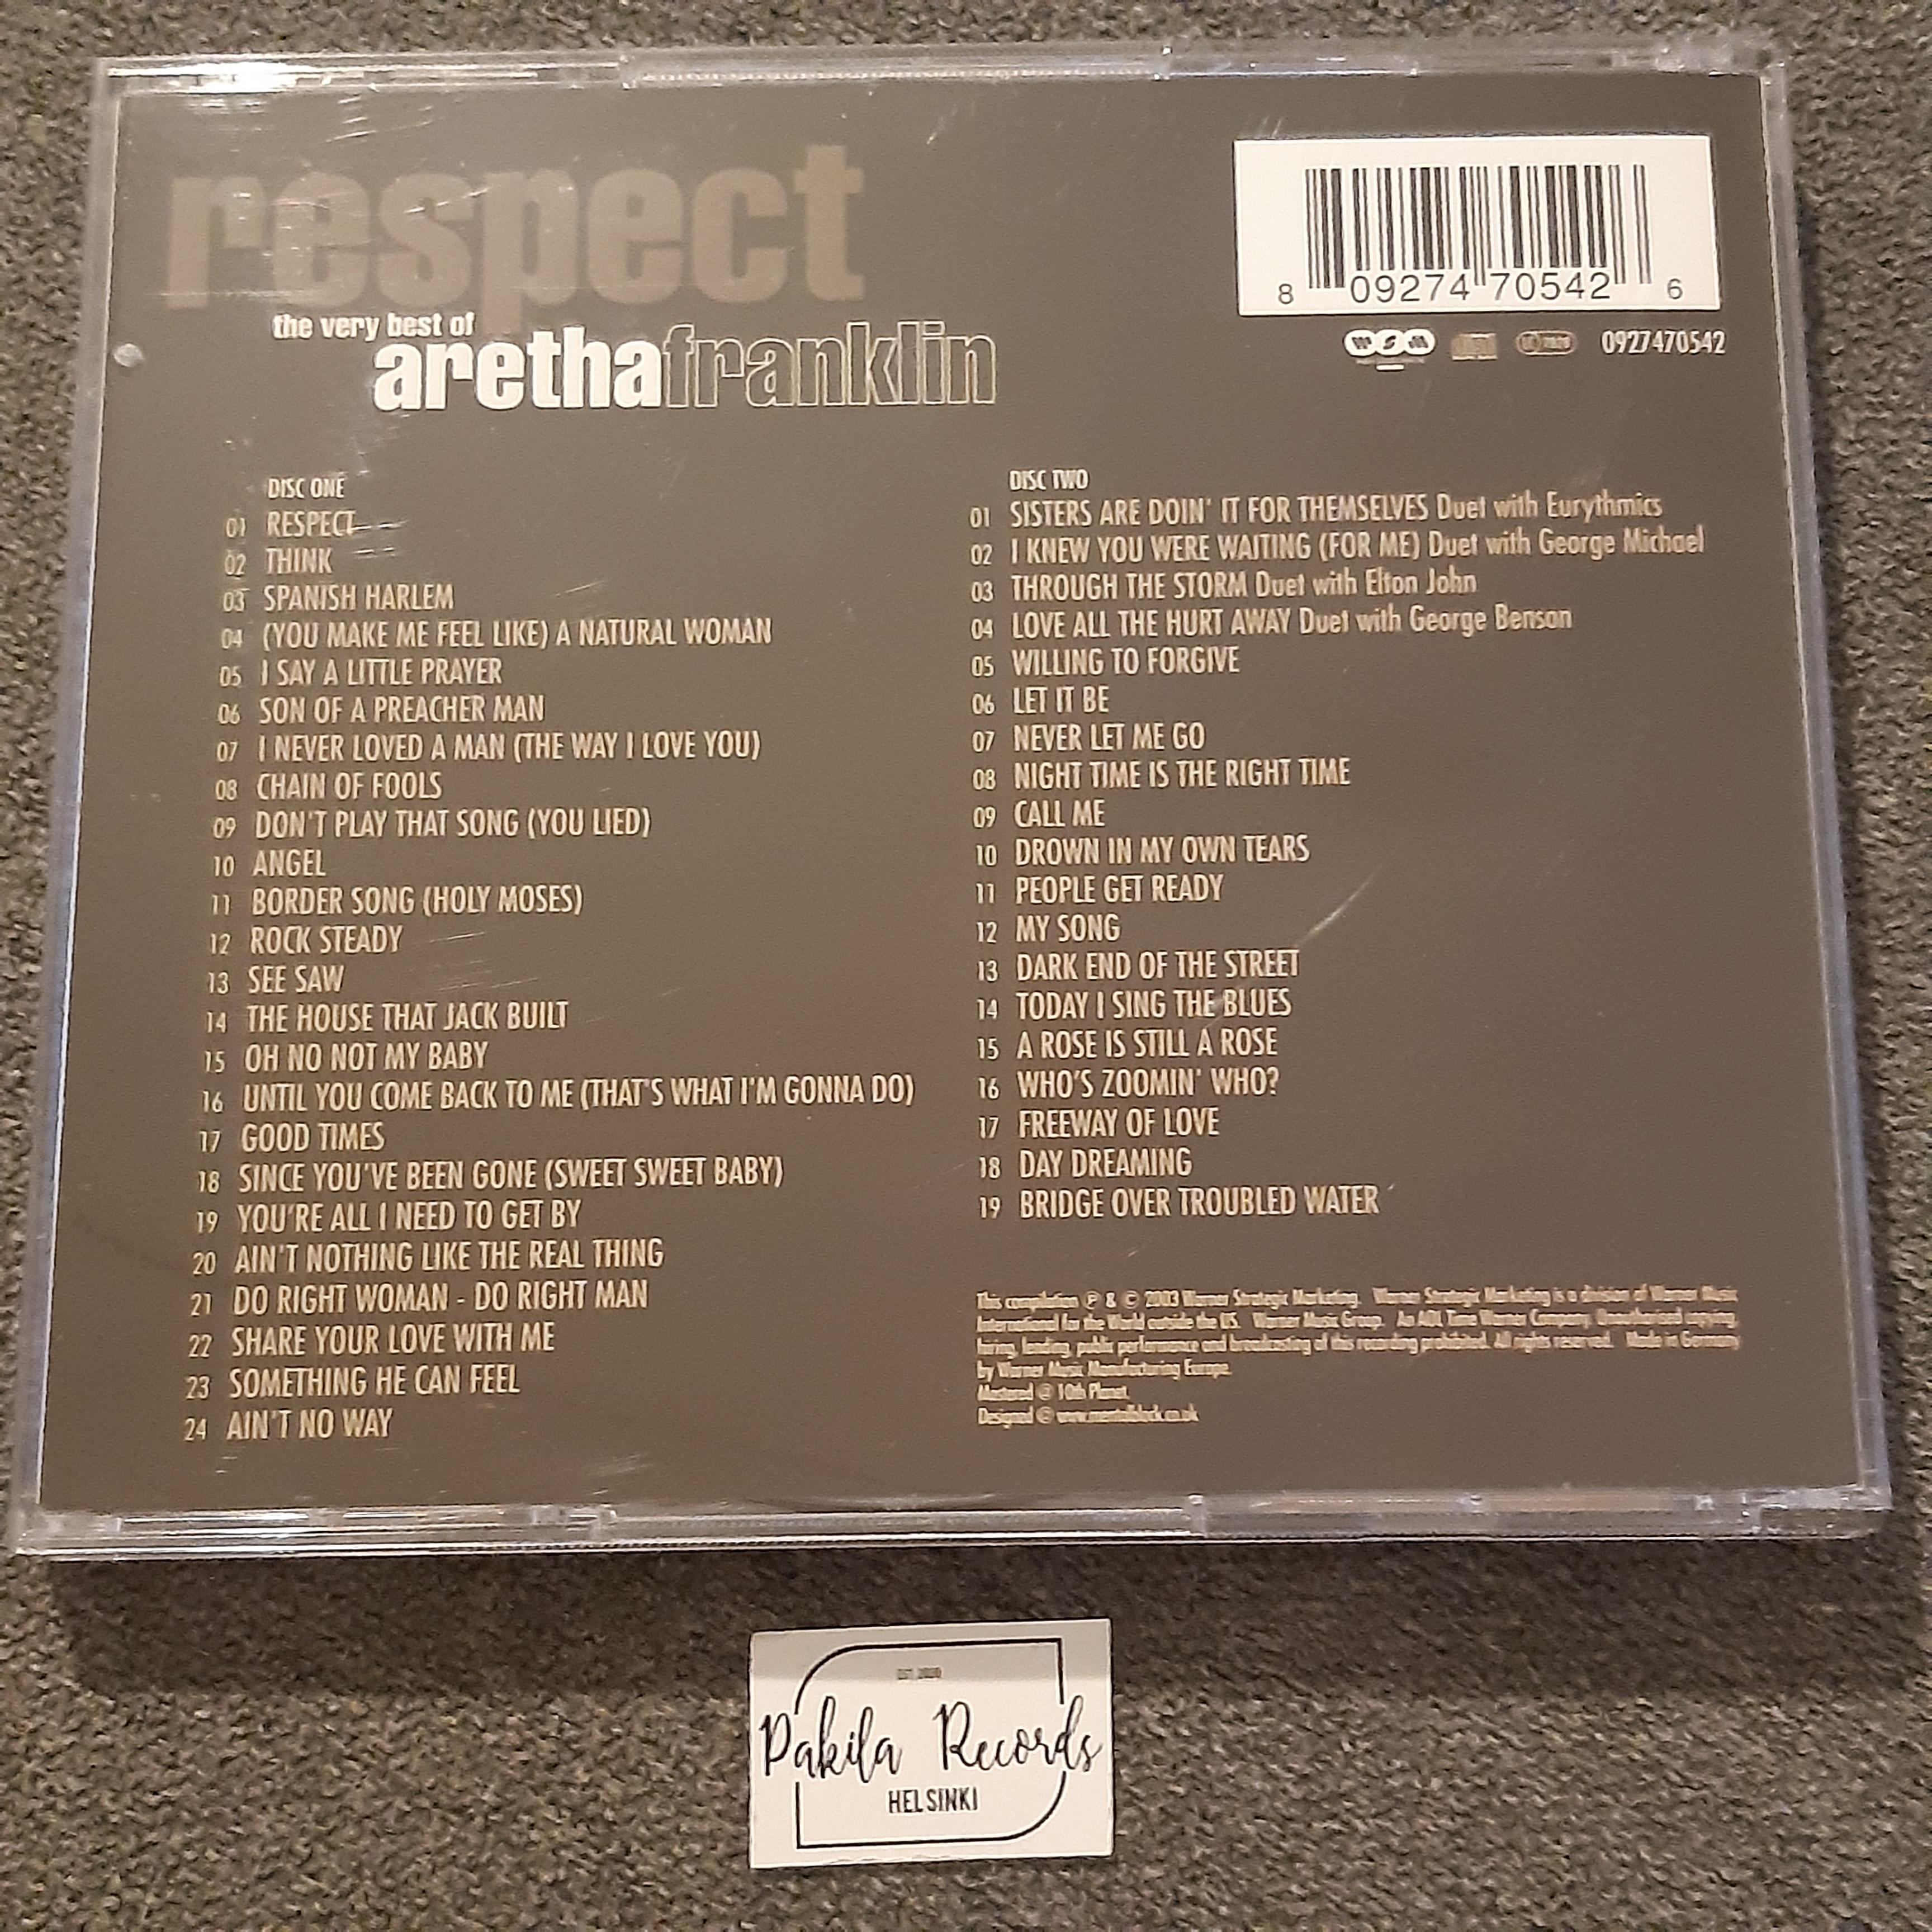 Aretha Franklin  - Respect, The Very Best Of - 2 CD (käytetty)